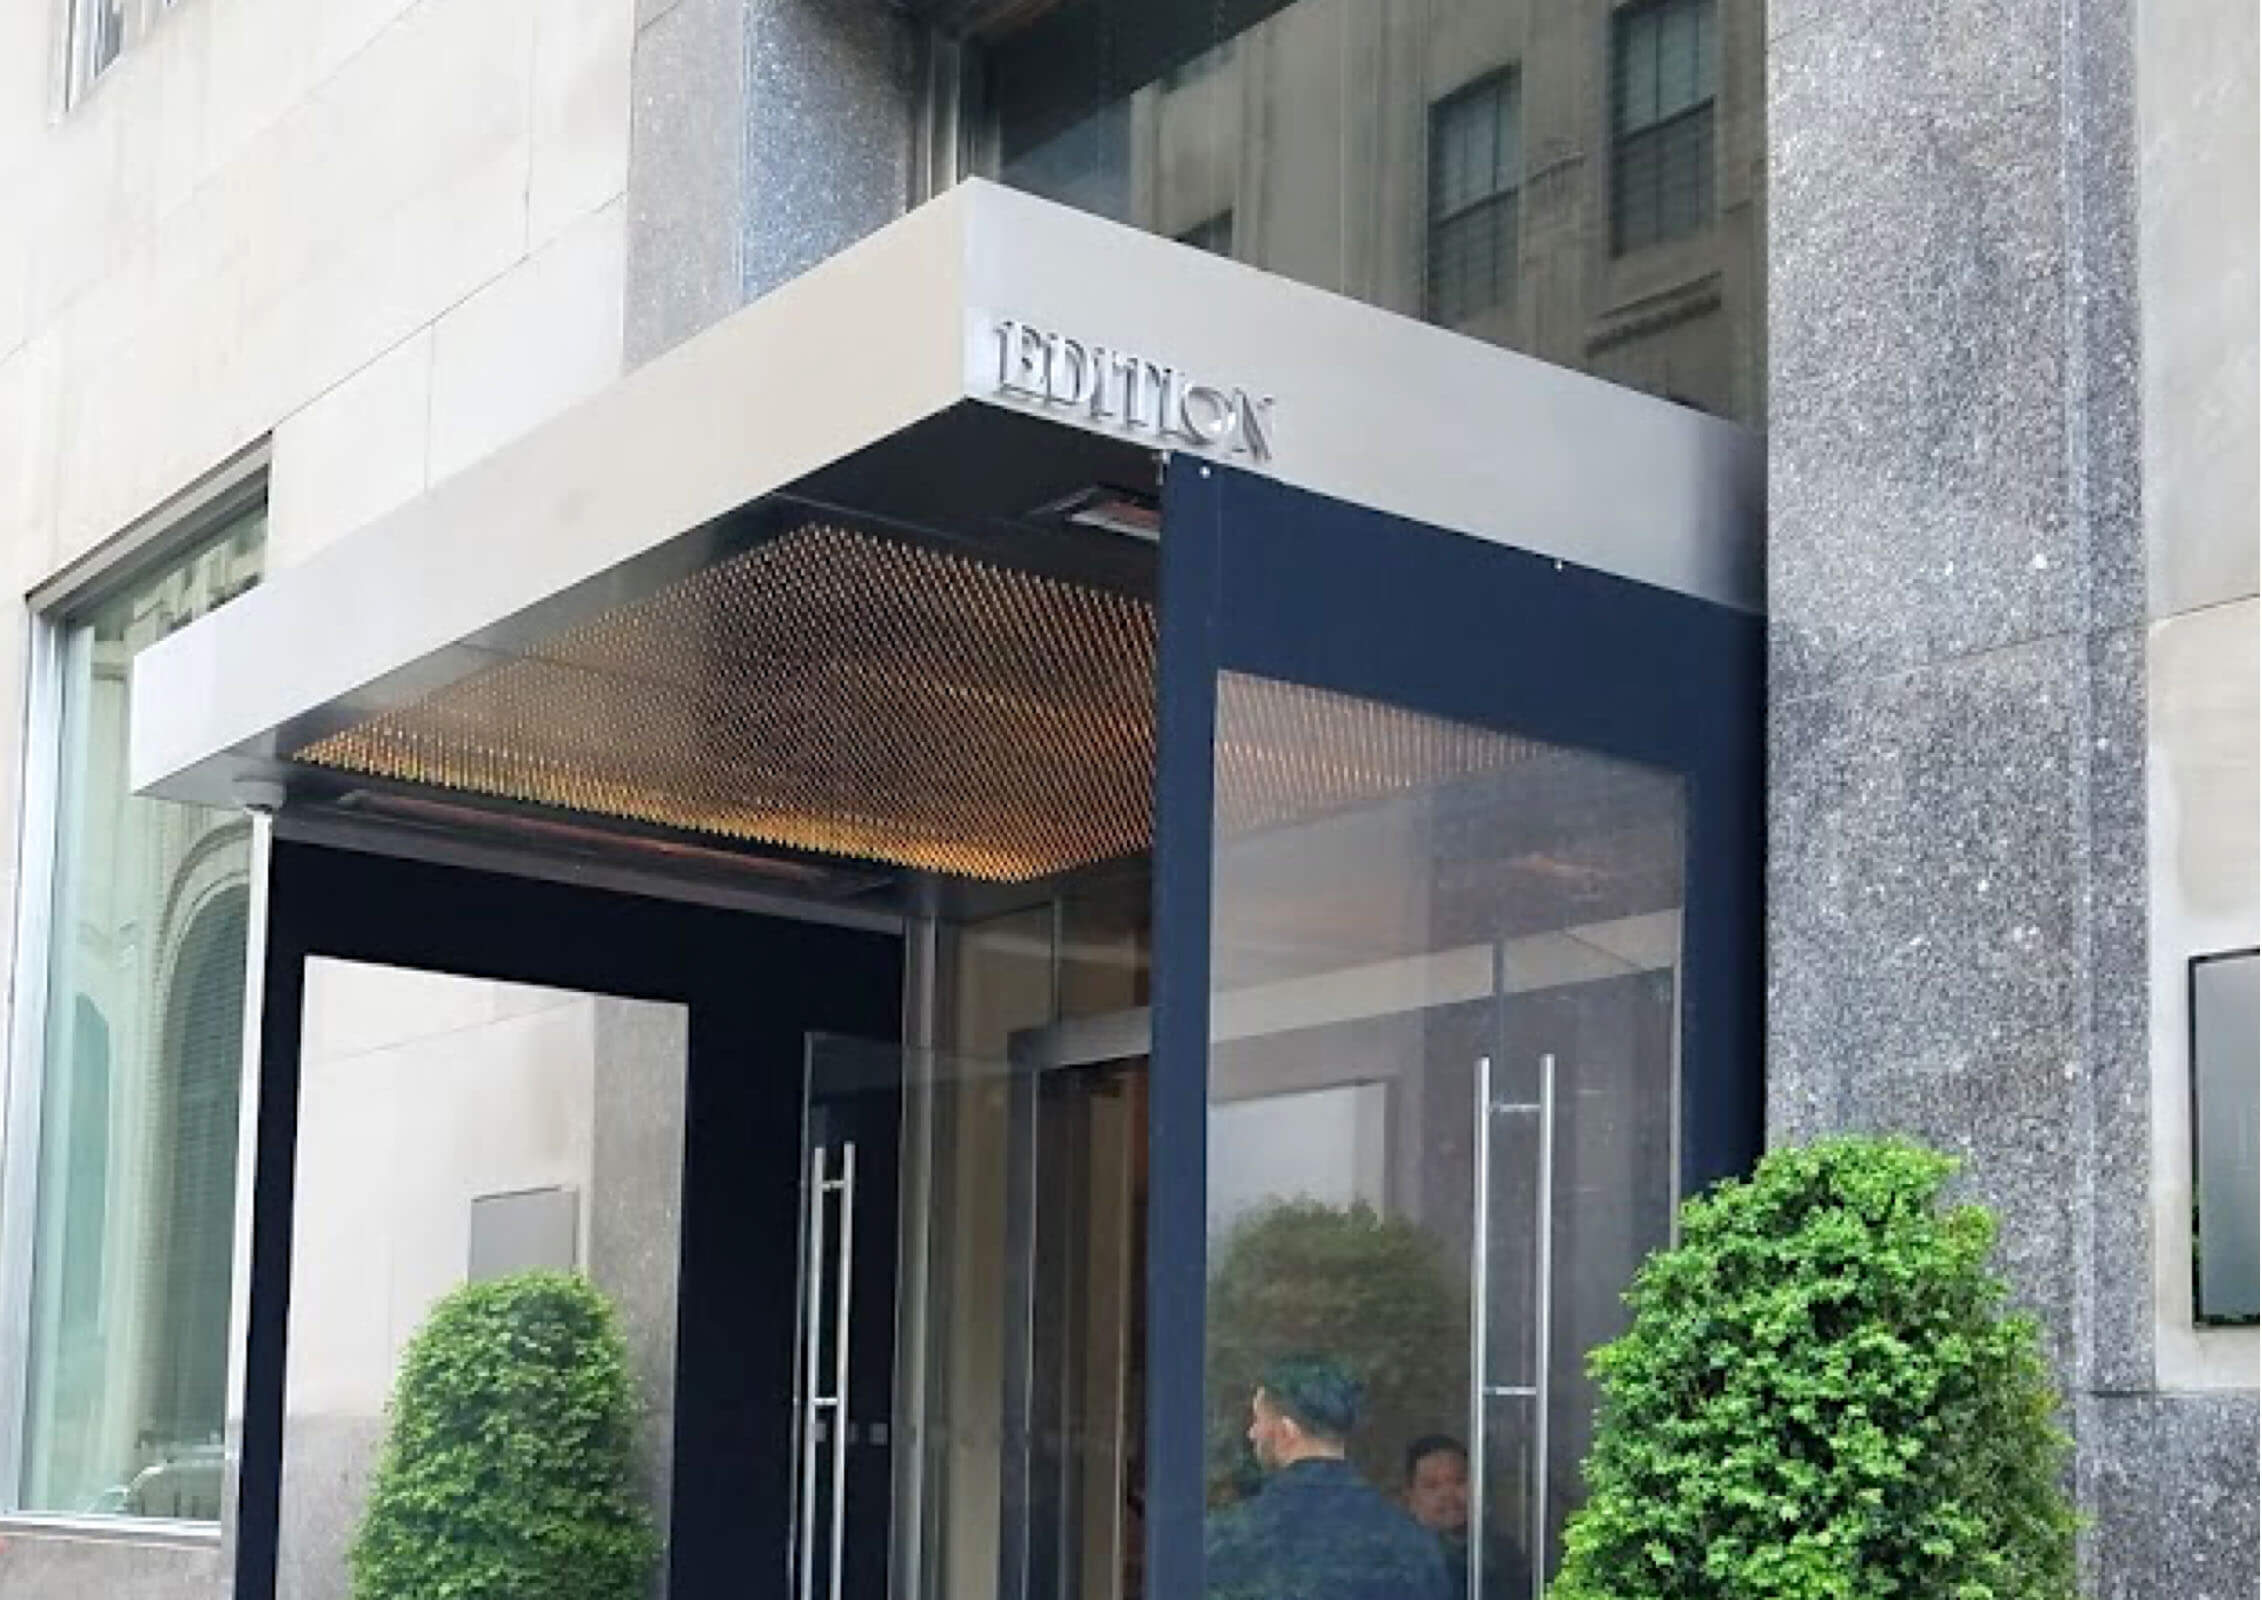 Mariott Edition Hotel opens at Five Madison Avenue, providing an additional amenity to One Madison Avenue and the neighborhood.